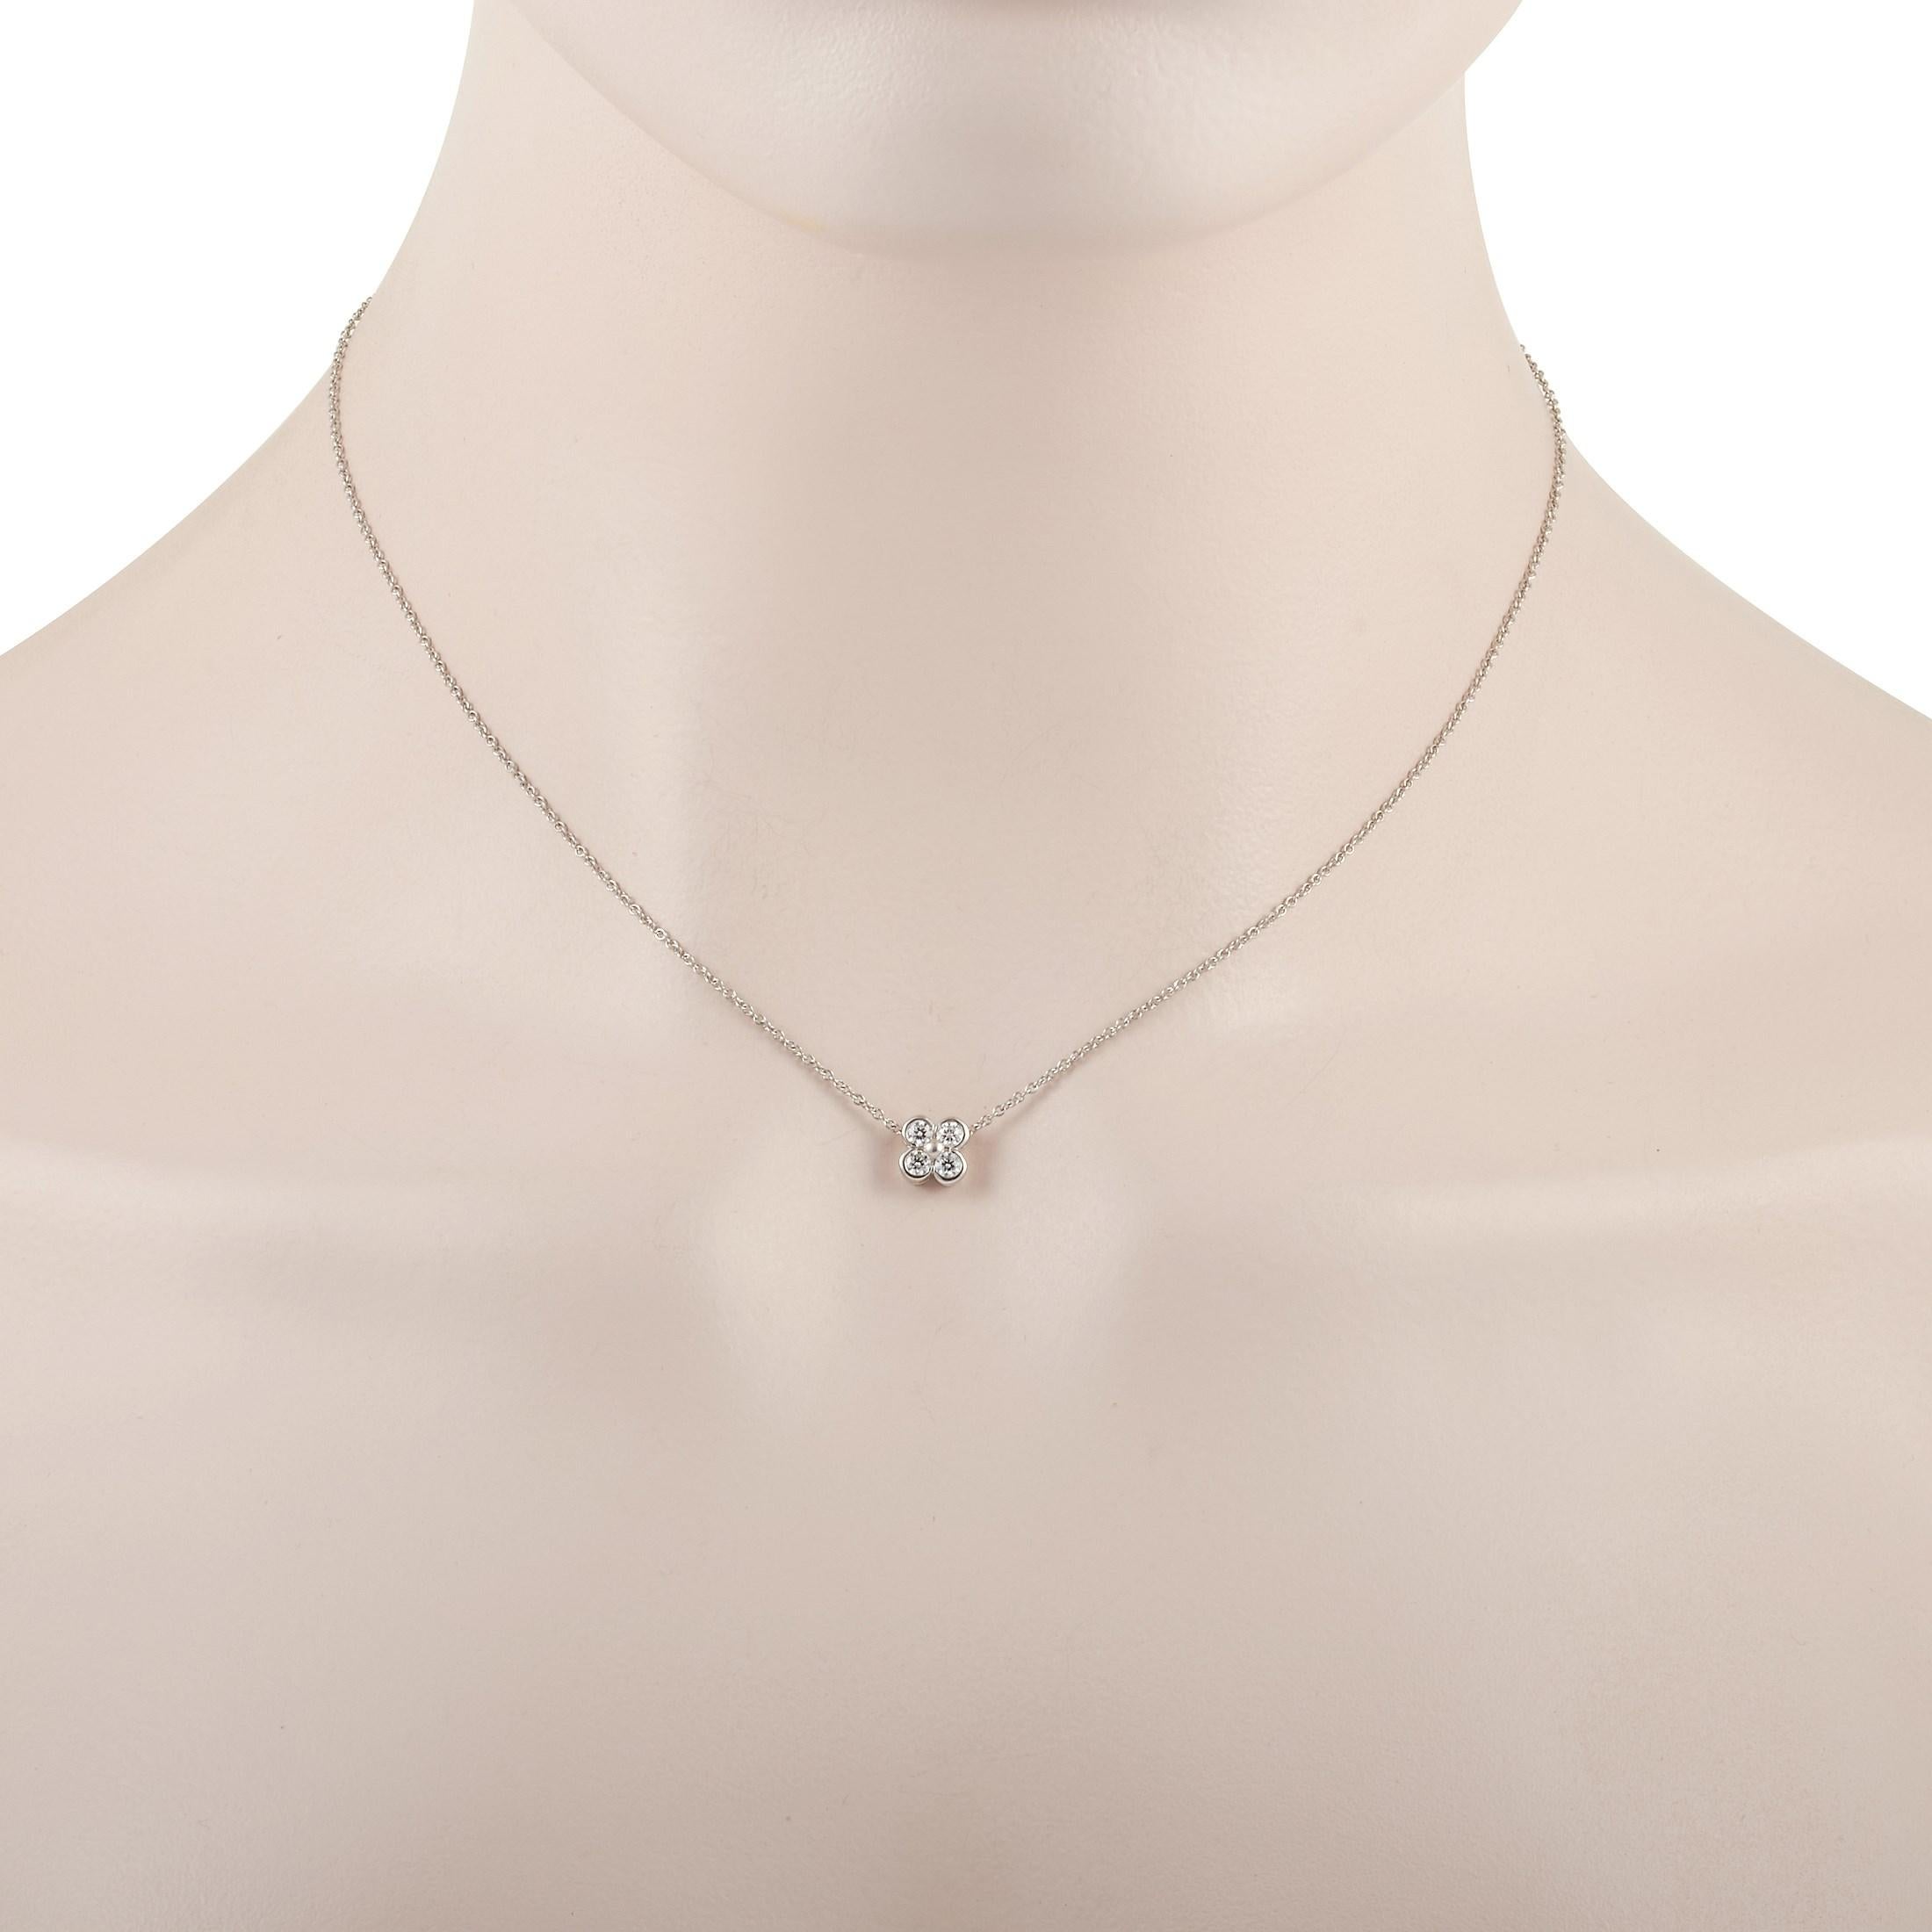 This classic Tiffany & Co. Platinum Diamond necklace is made with Platinum and features four round diamonds that weigh 0.20 carats and are set in a clover-shaped pendant. The fine platinum chain measures 15 inches in length and features a spring